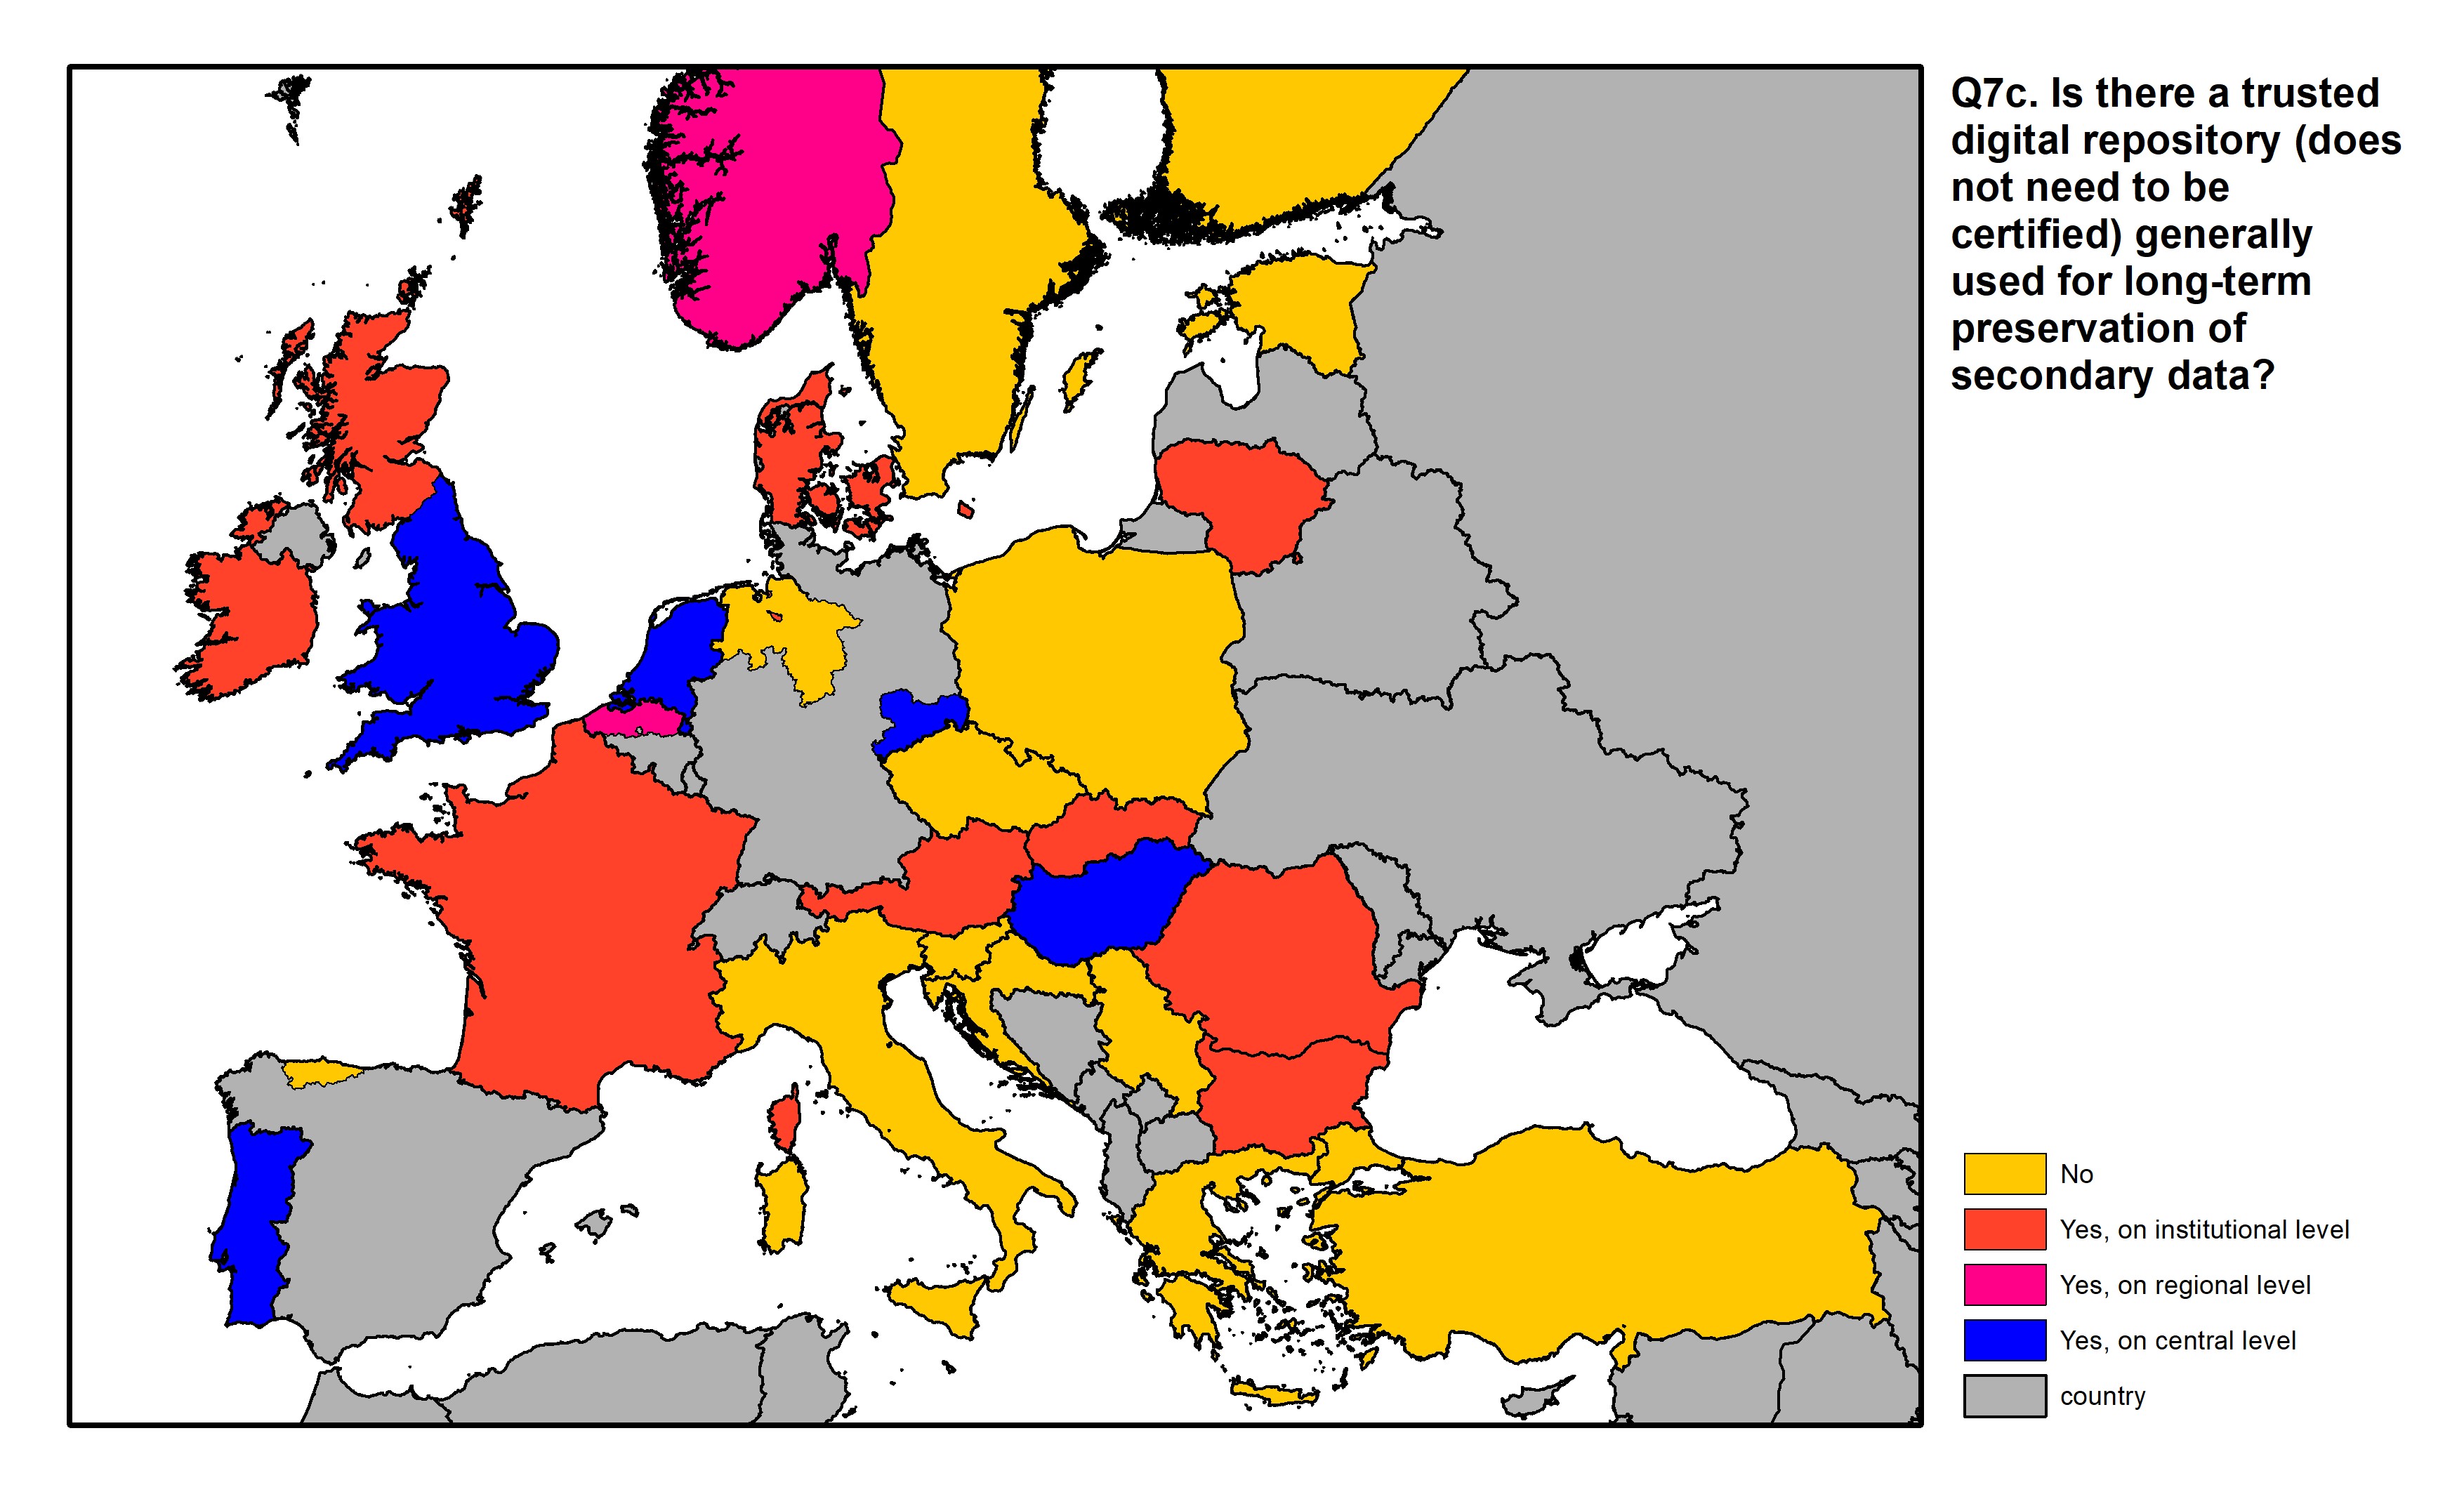 Figure 23: a map of Europe showing countries and regions in colour based on response rates to the survey question.